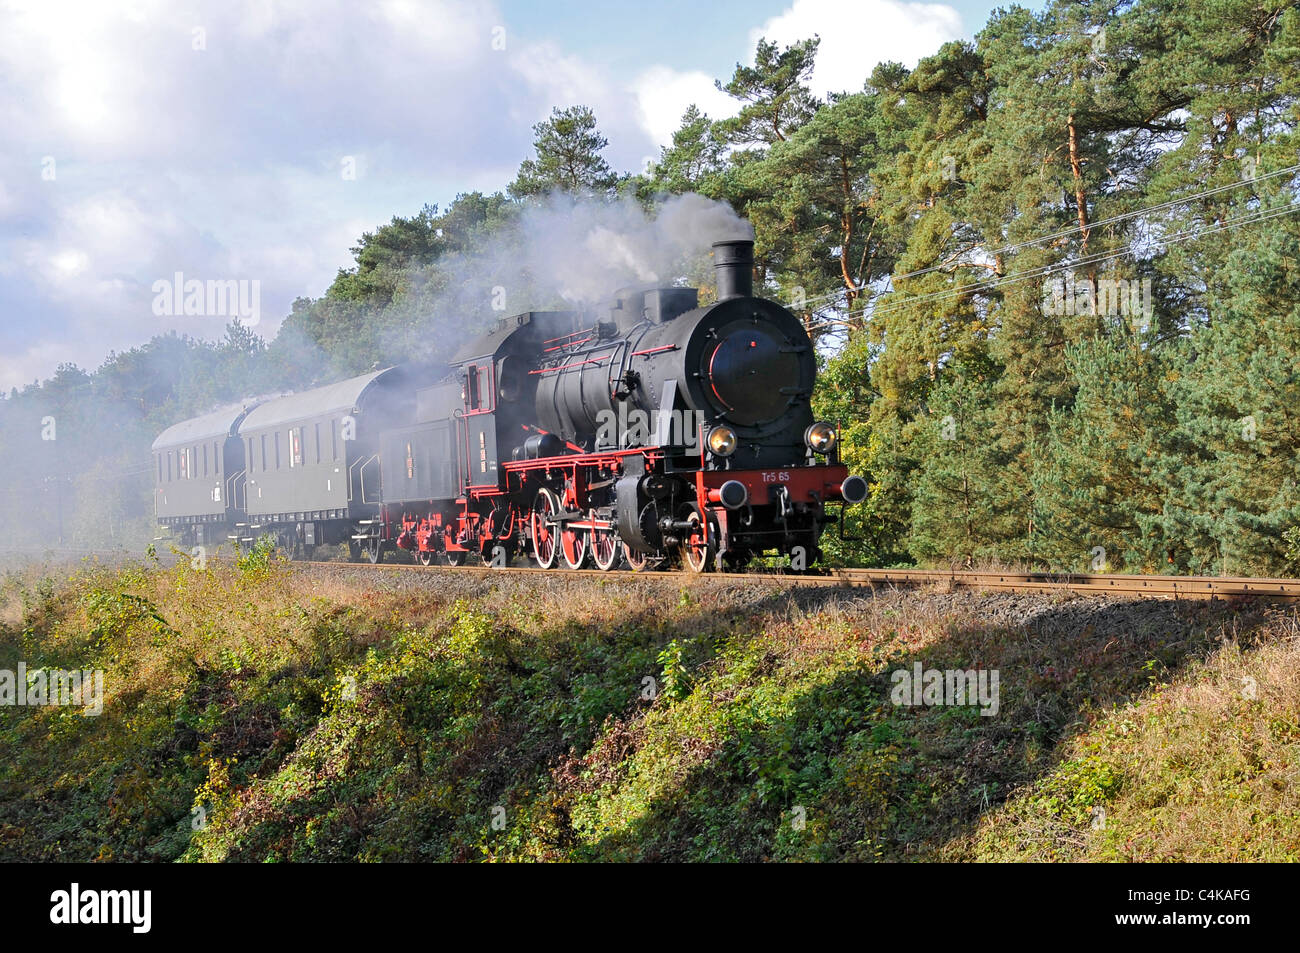 An old steam locomotive in an elevated position under steam in the Polish countryside. Stock Photo